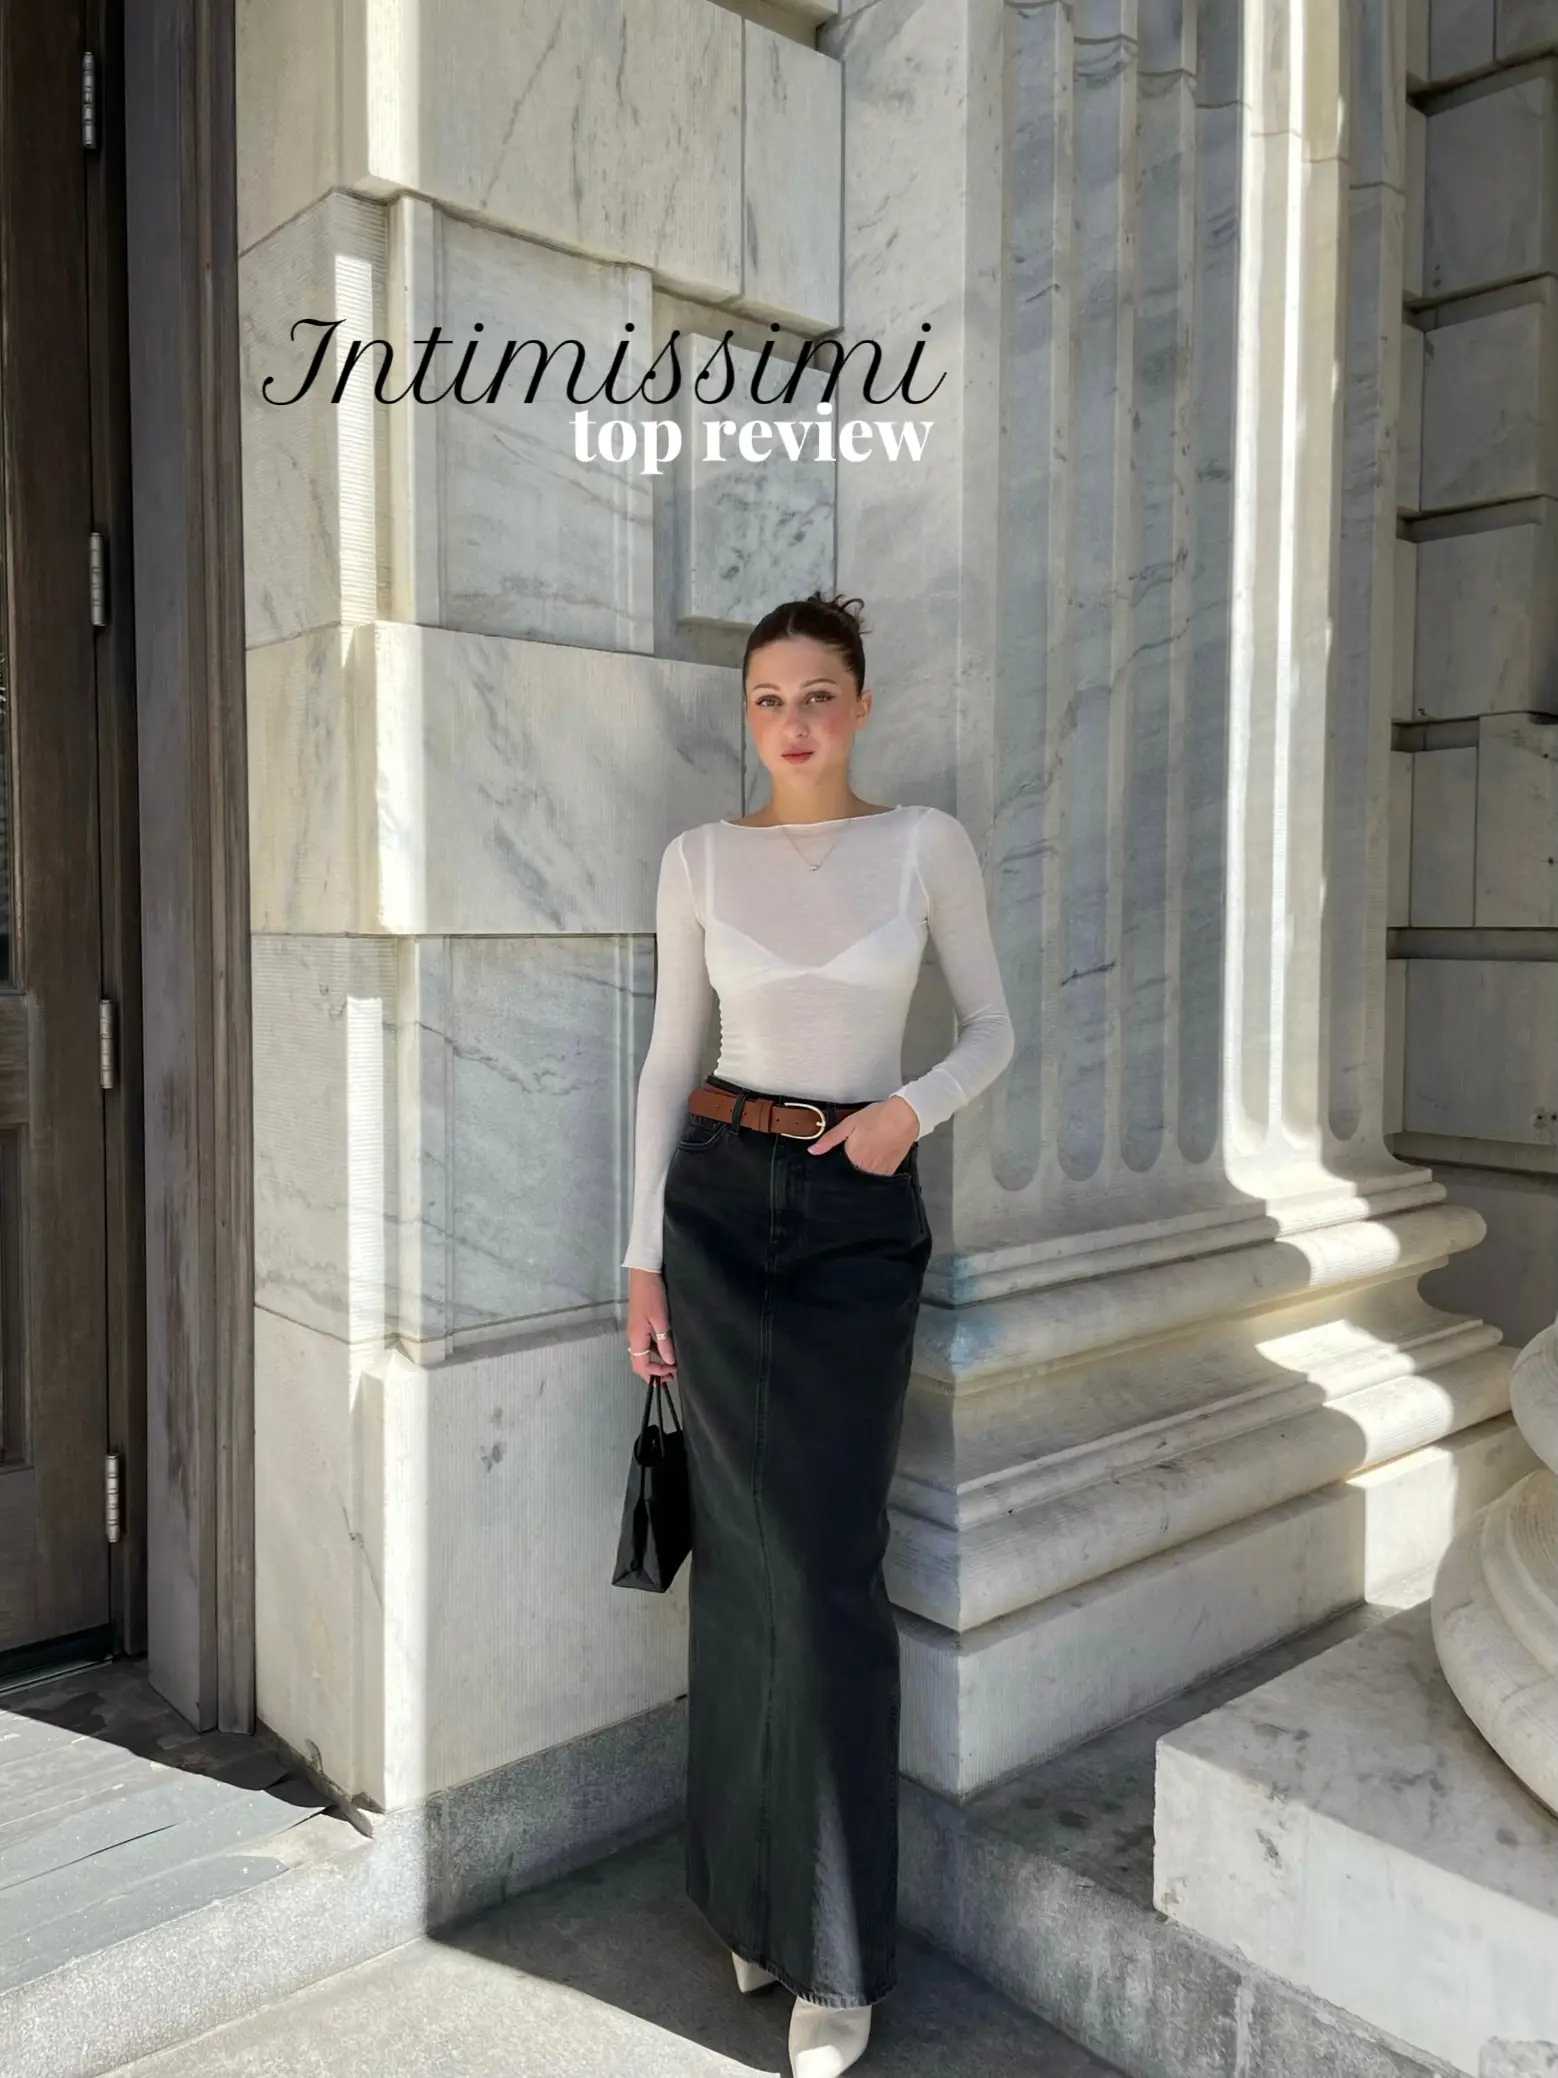 Intimissimi top review✨, Gallery posted by Daria